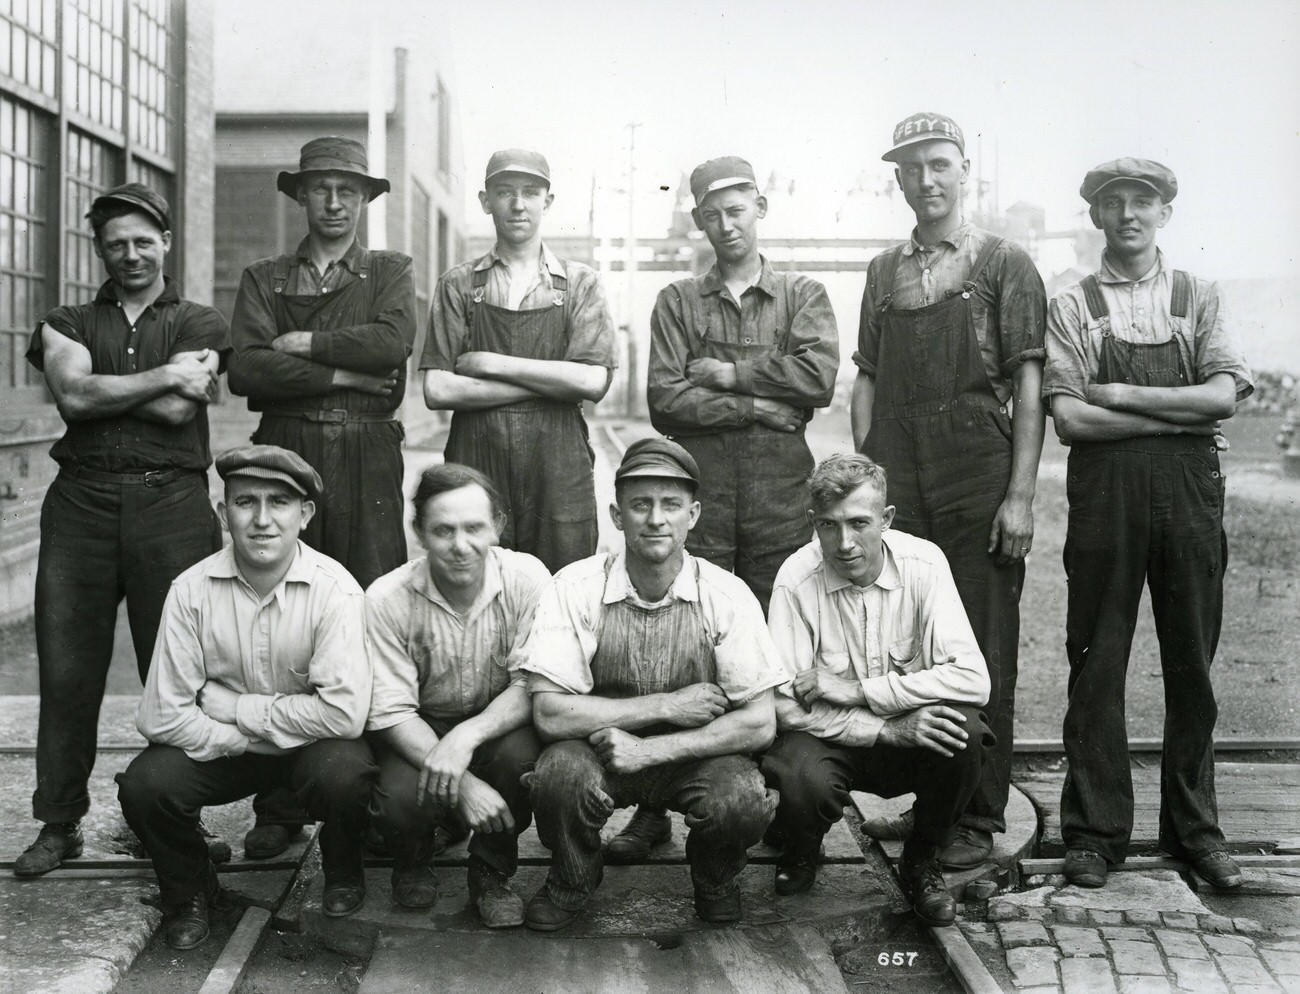 Buckeye Steel employees, founded October 1902, located on Parsons Avenue, merged with Worthington Industries in 1980, circa 1910s